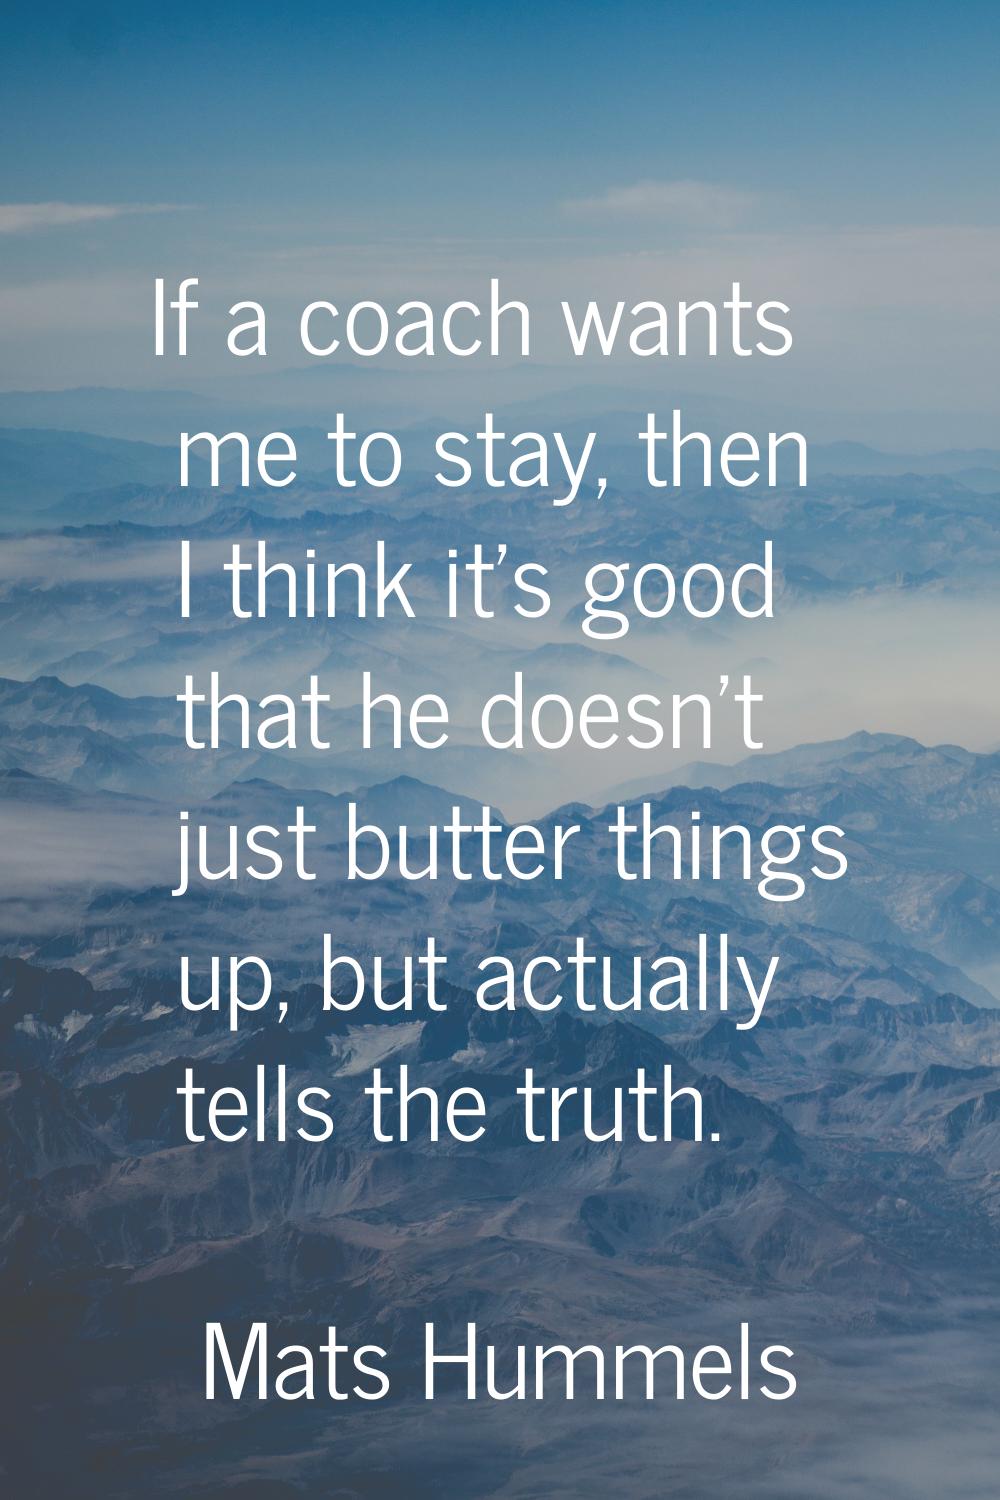 If a coach wants me to stay, then I think it's good that he doesn't just butter things up, but actu